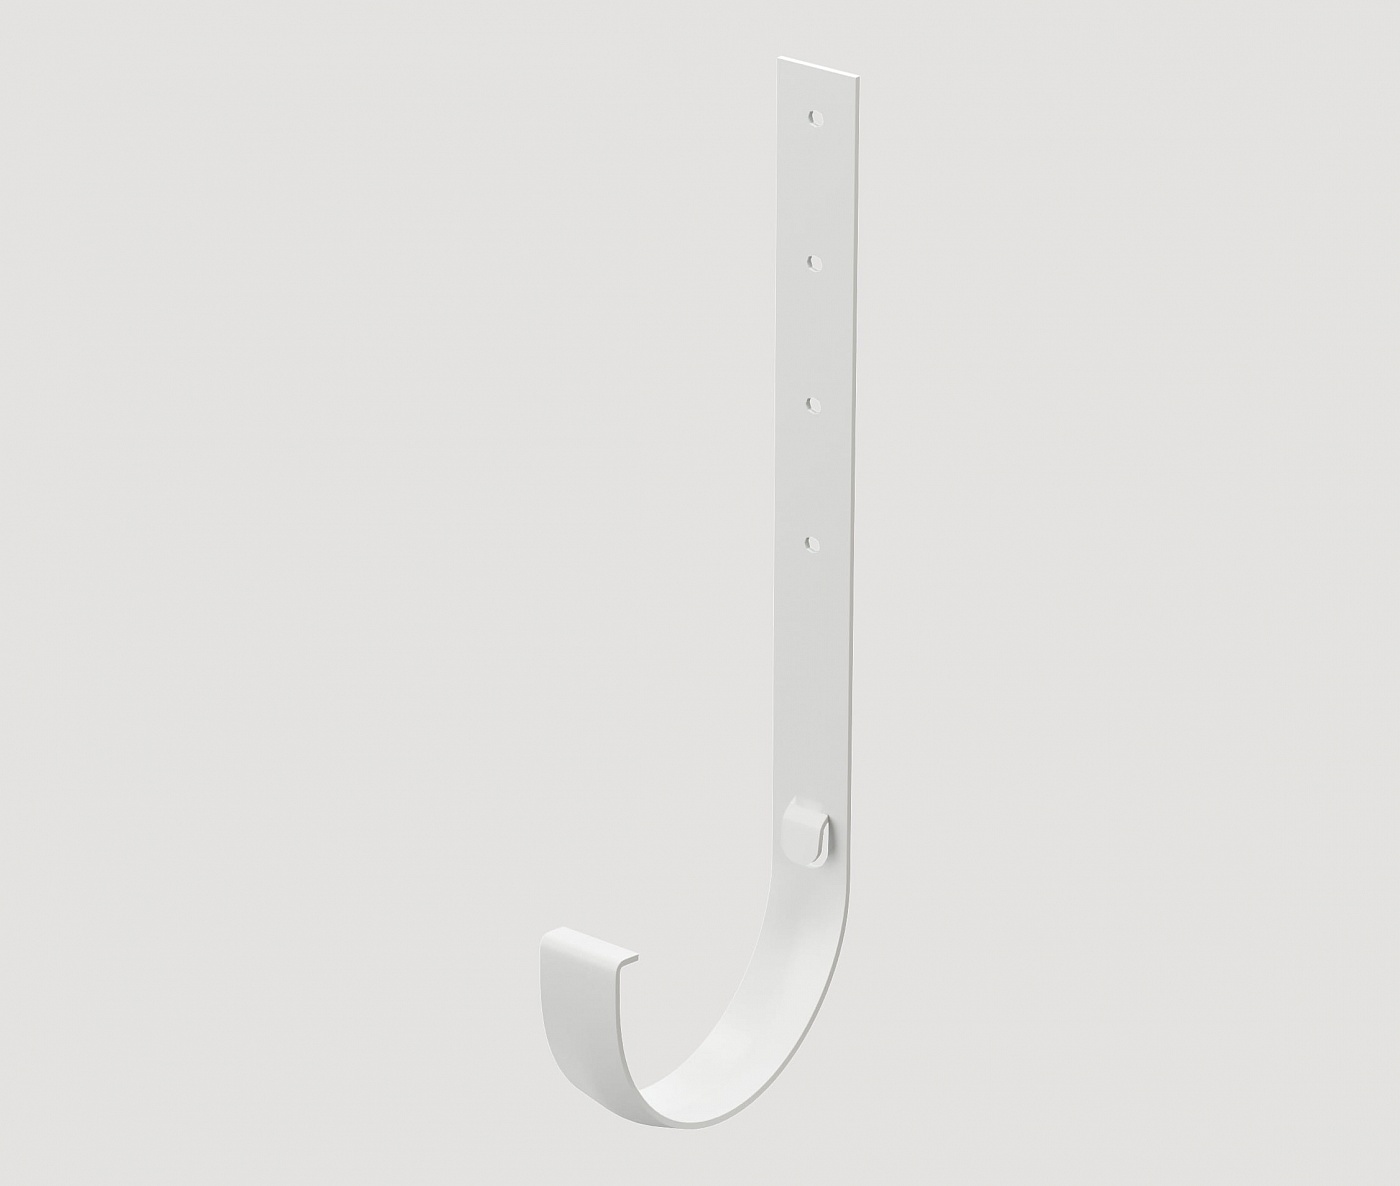 Водостоки - STANDARD SERIES White RAL 9003 - Elements of the drainage system - Gutter metal bracket